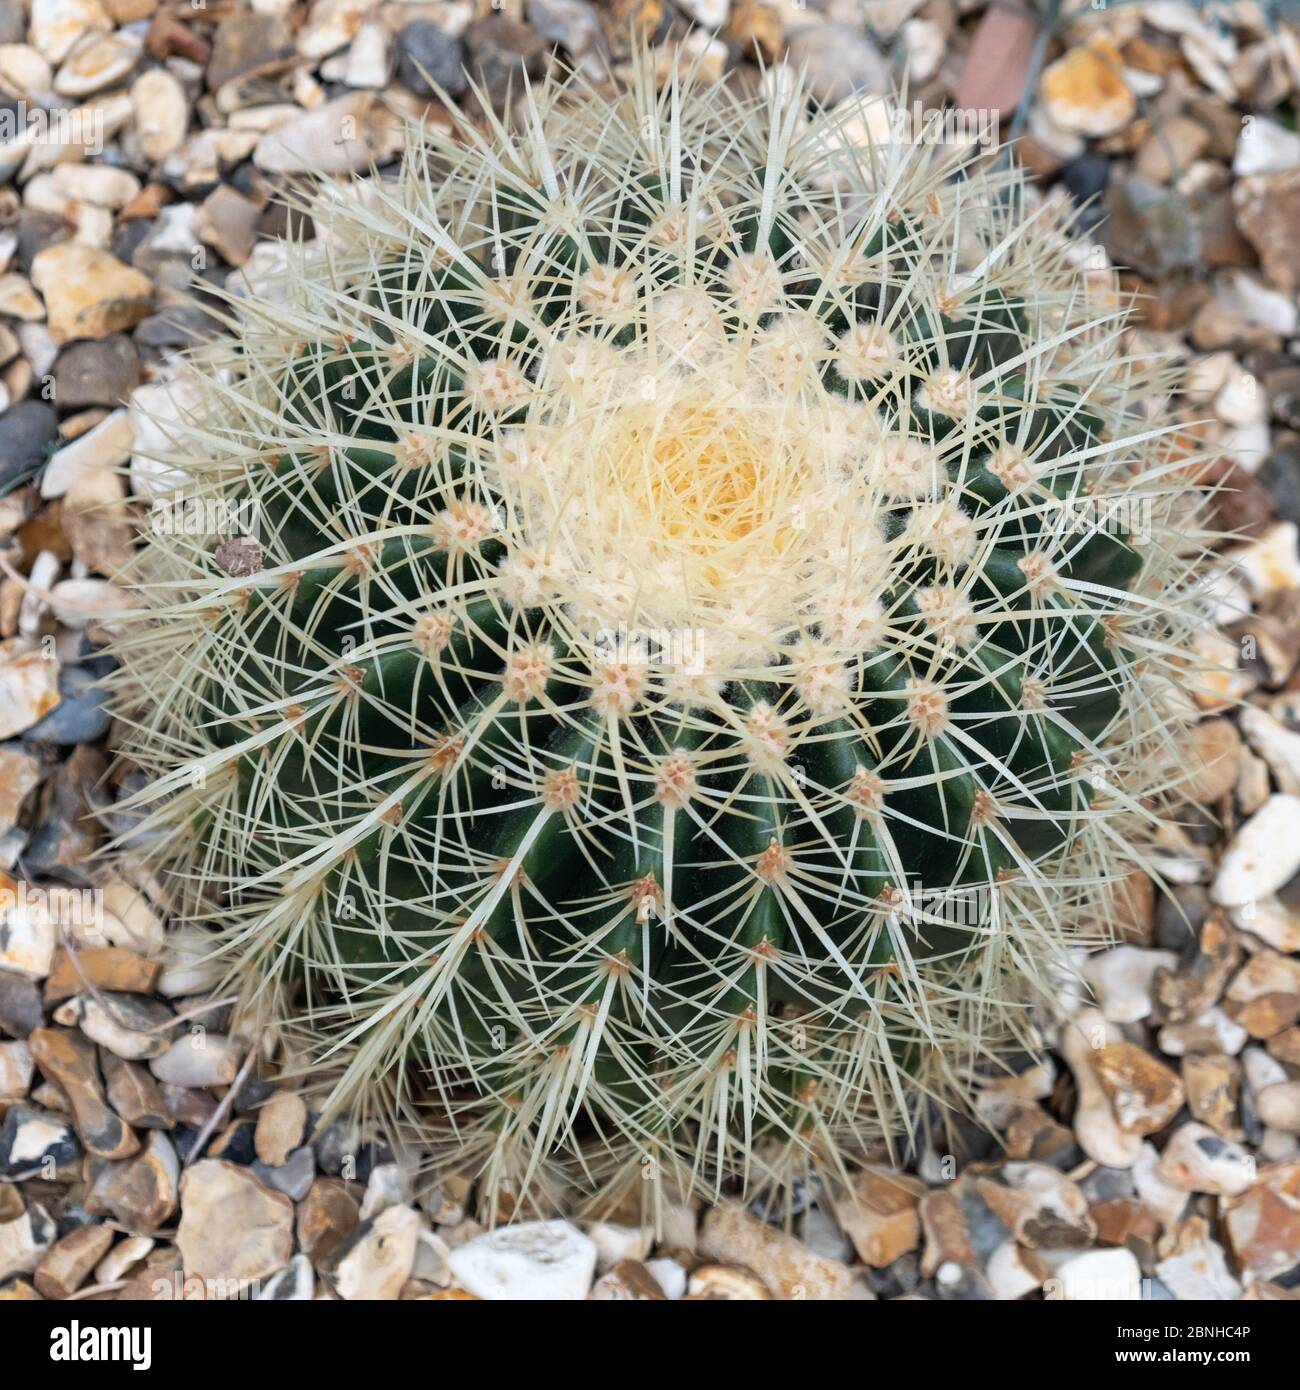 A fine example of the cactus  Echinocactus grusonii,  also known as the Golden Barrel cactus Stock Photo